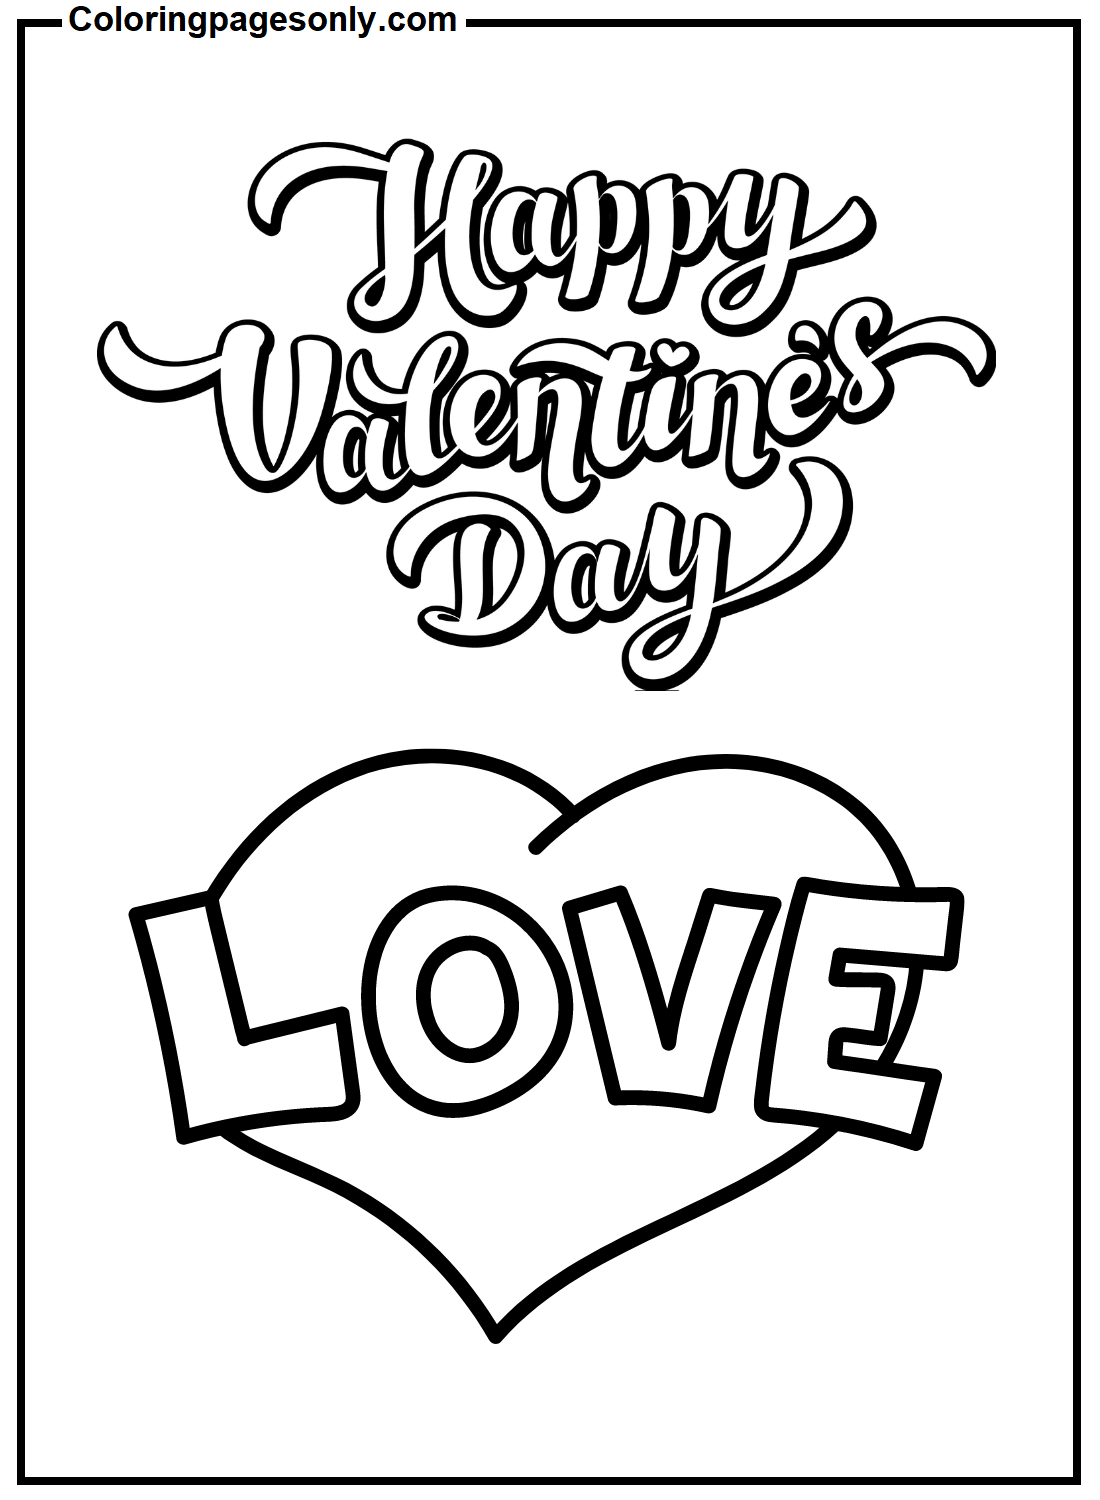 Happy Valentine’s Day With Heart Coloring Pages